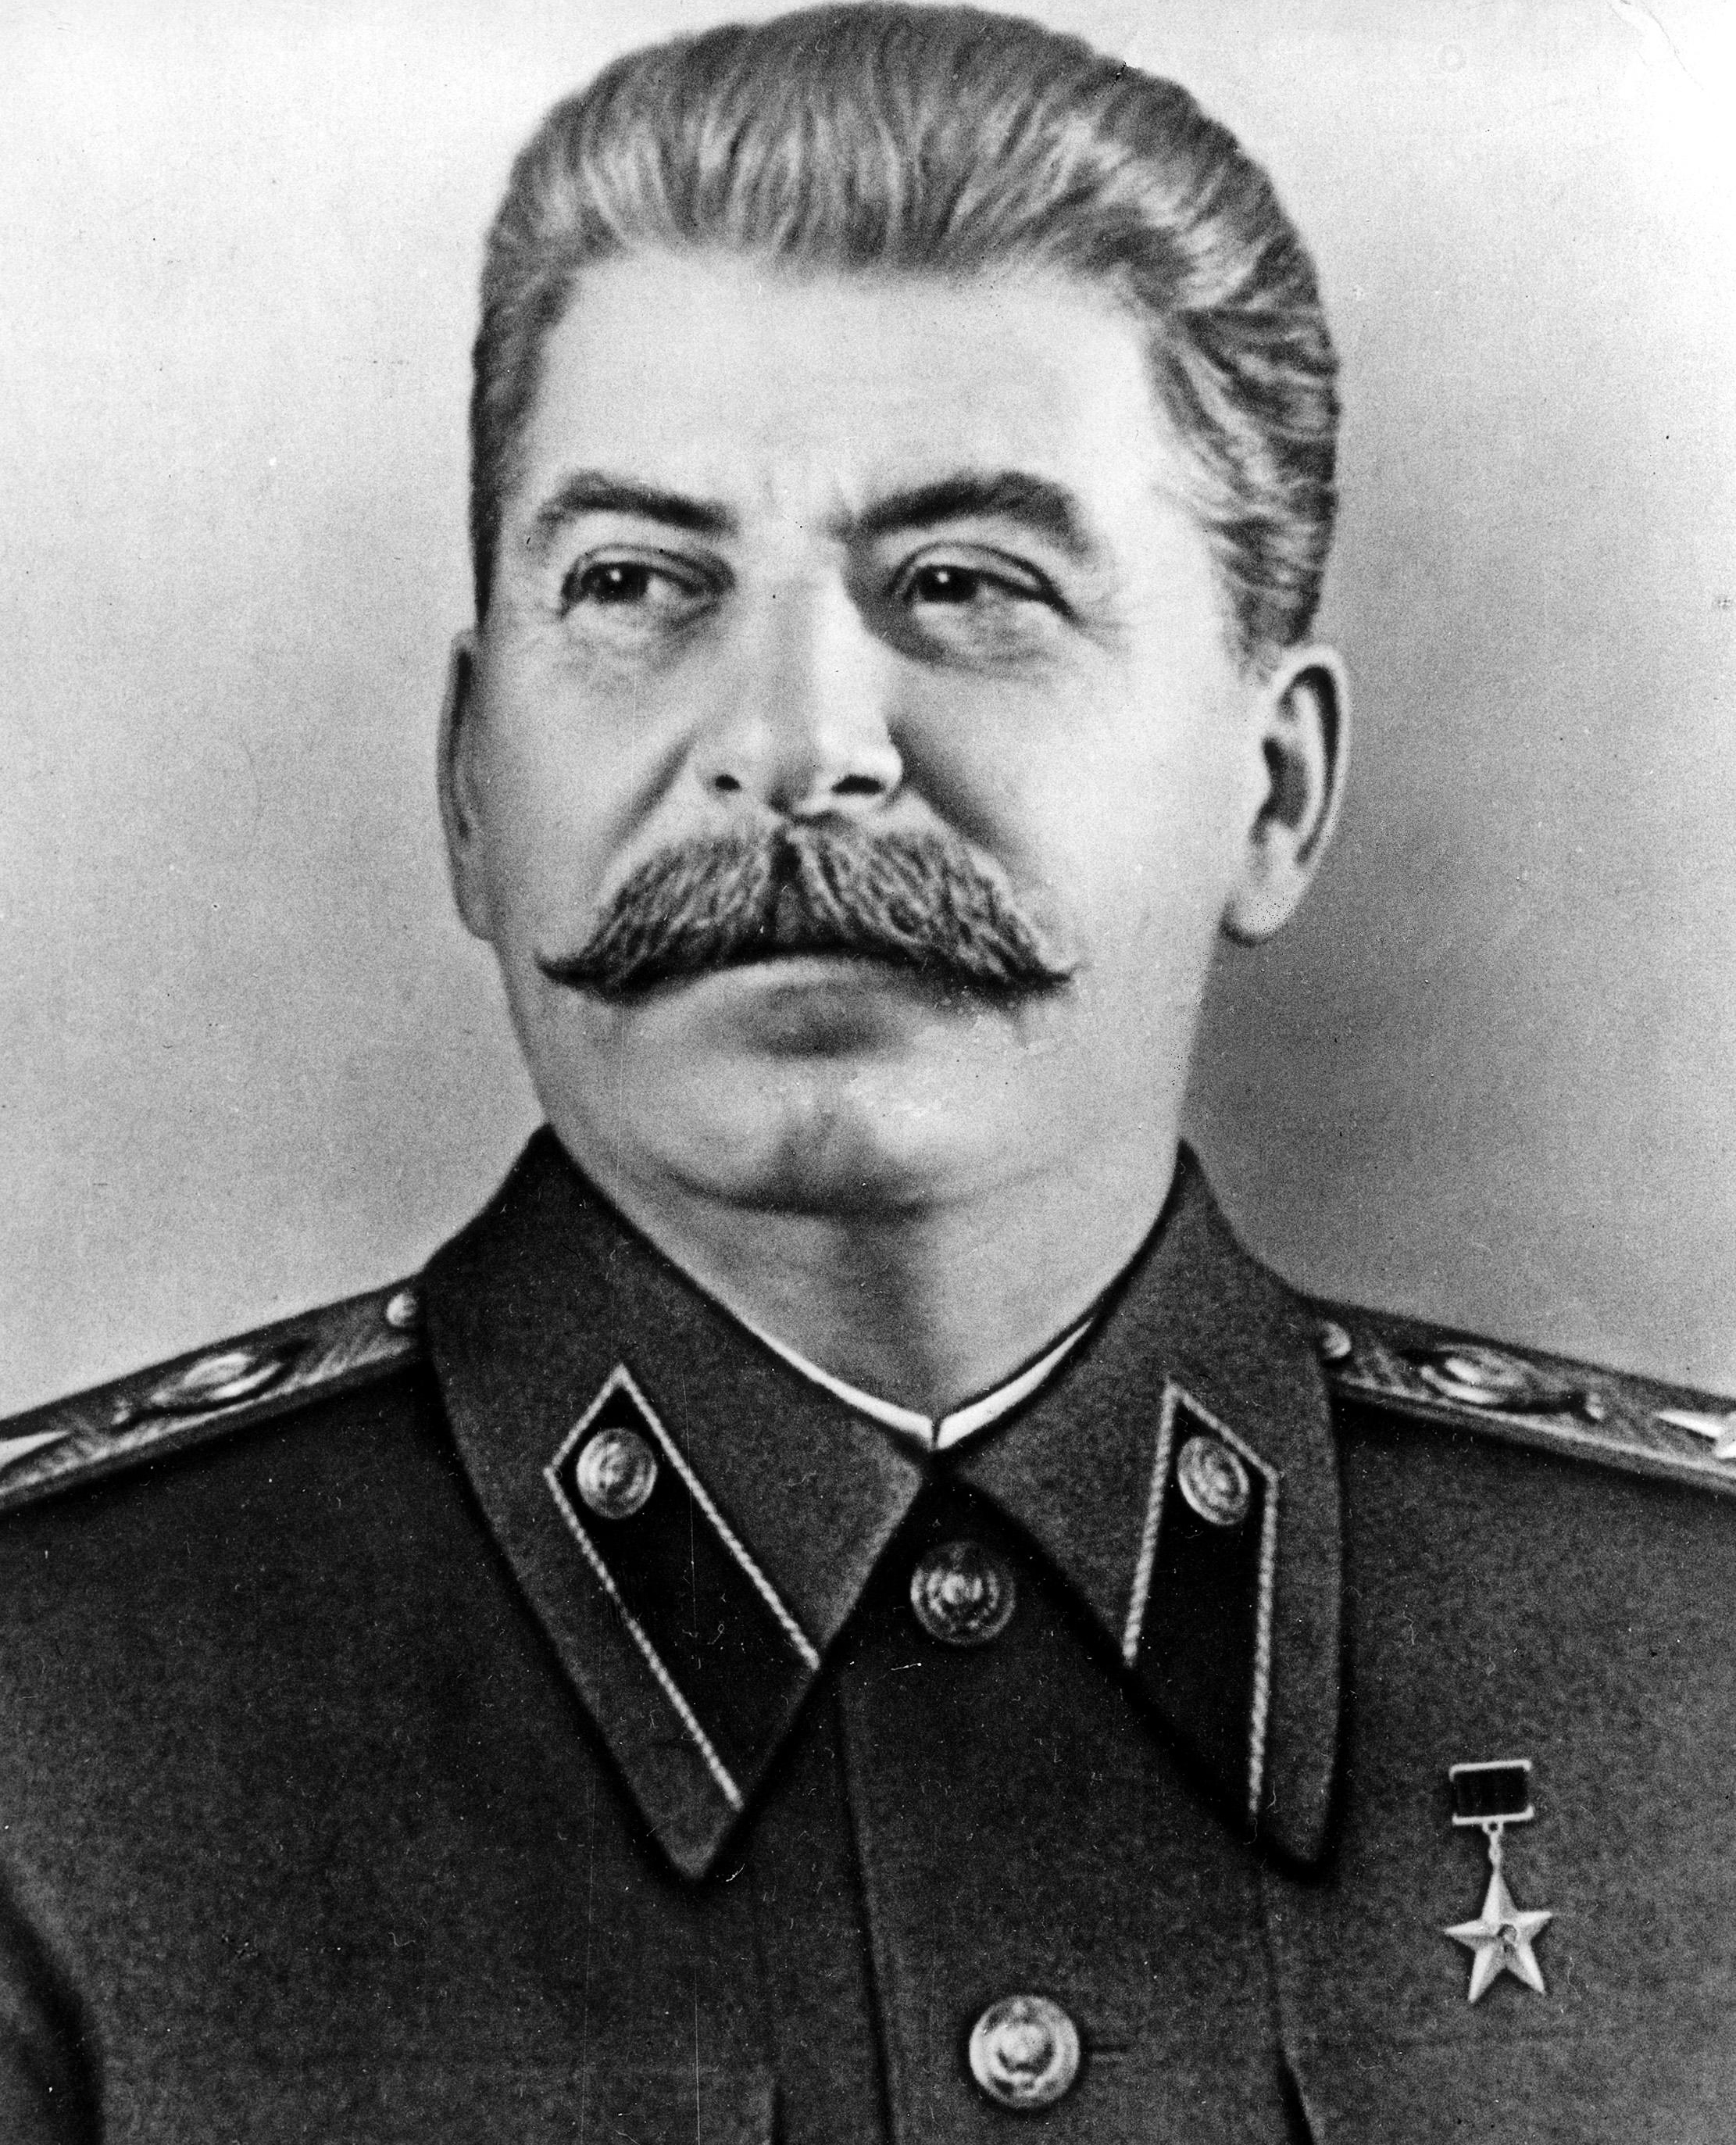 An official portrait of Soviet Premier Josef Stalin is issued to commemorate his 70th birthday on Dec. 21, 1949 . (AP Photo)